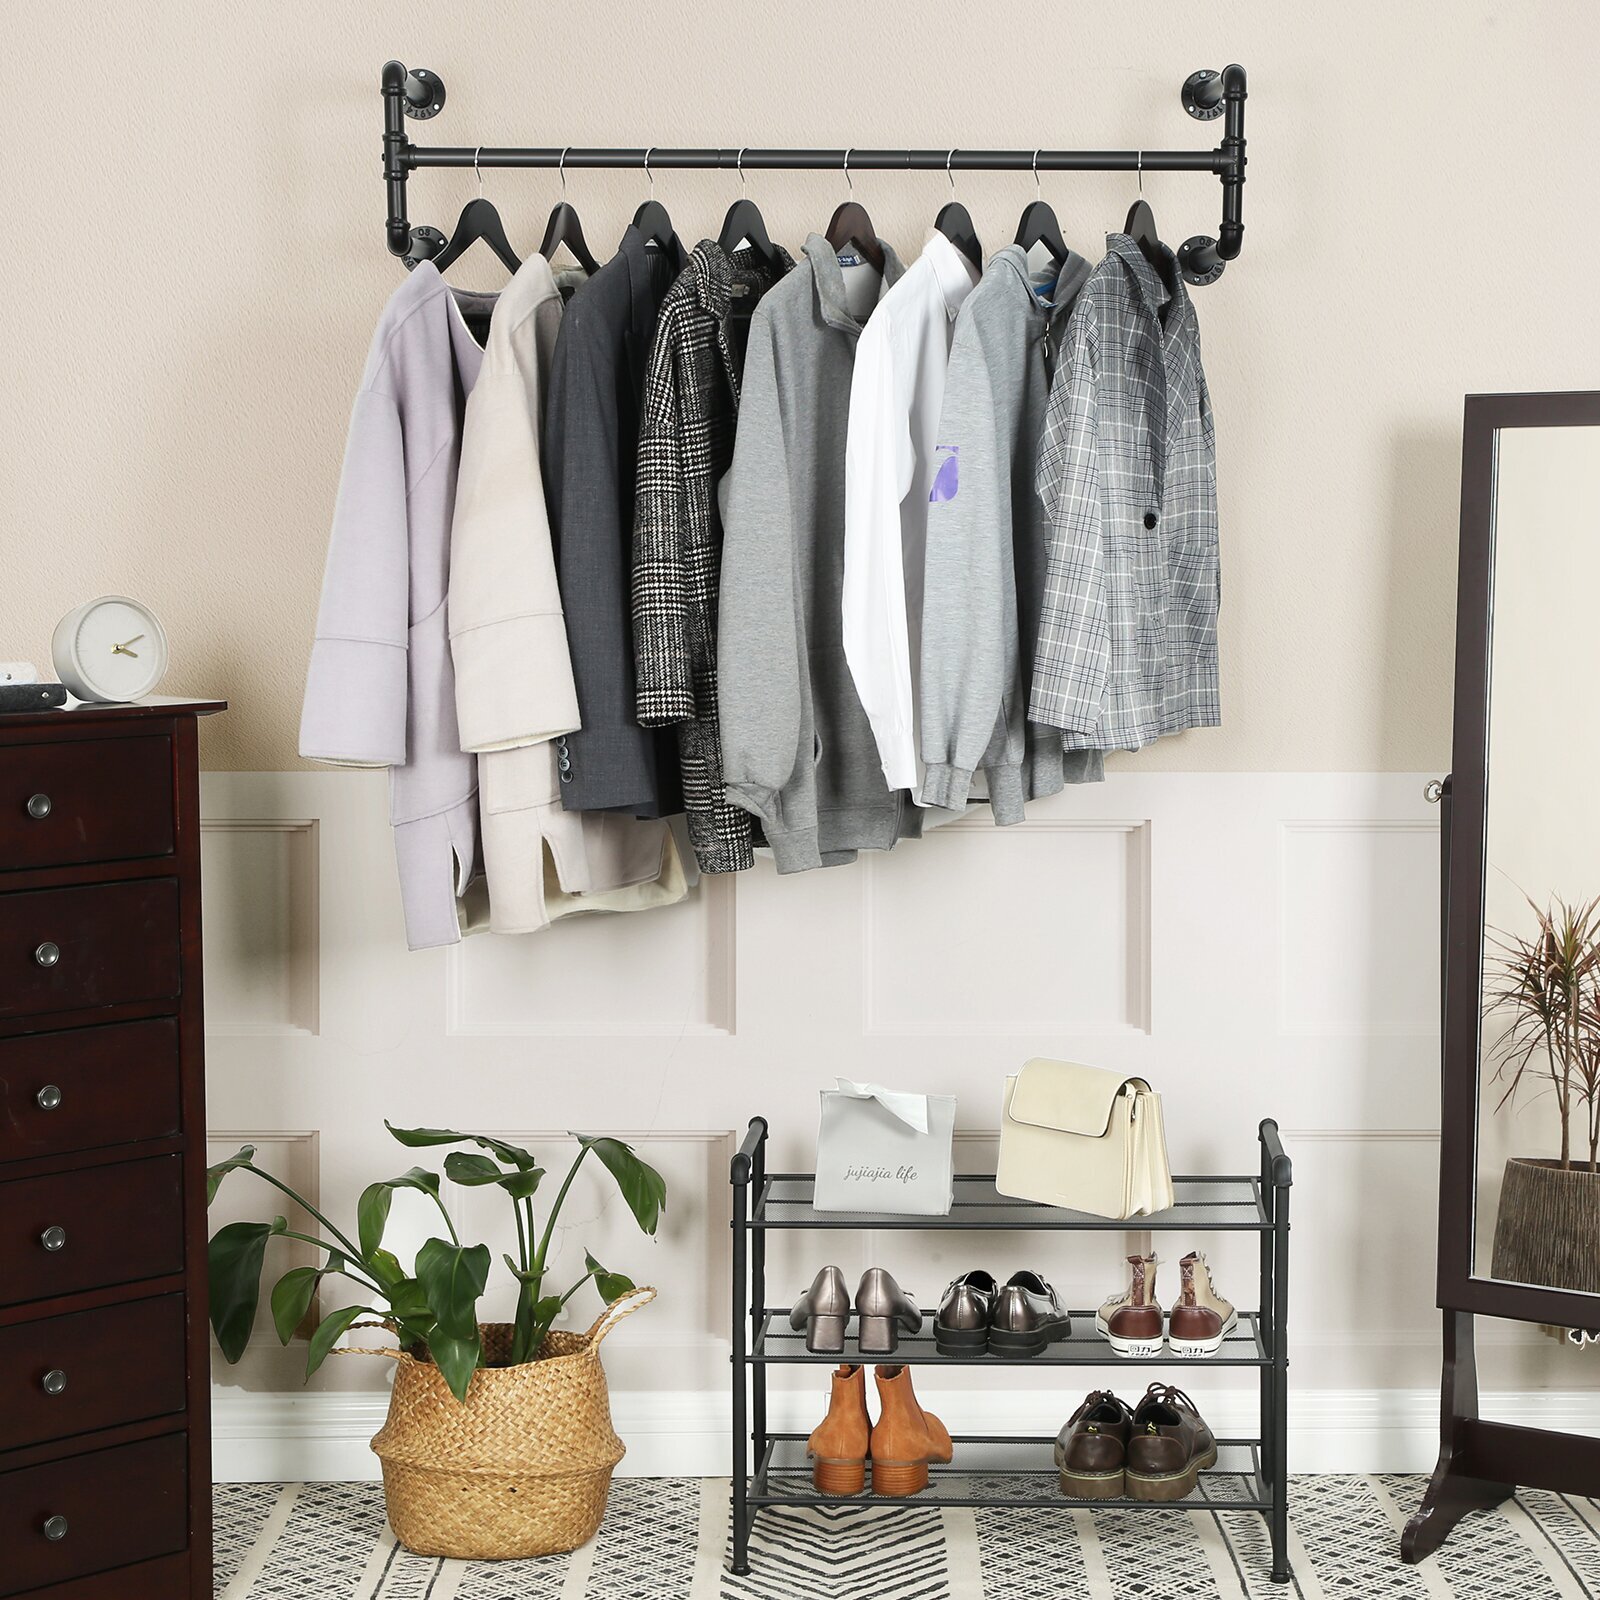 Basic wall hanger for clothes